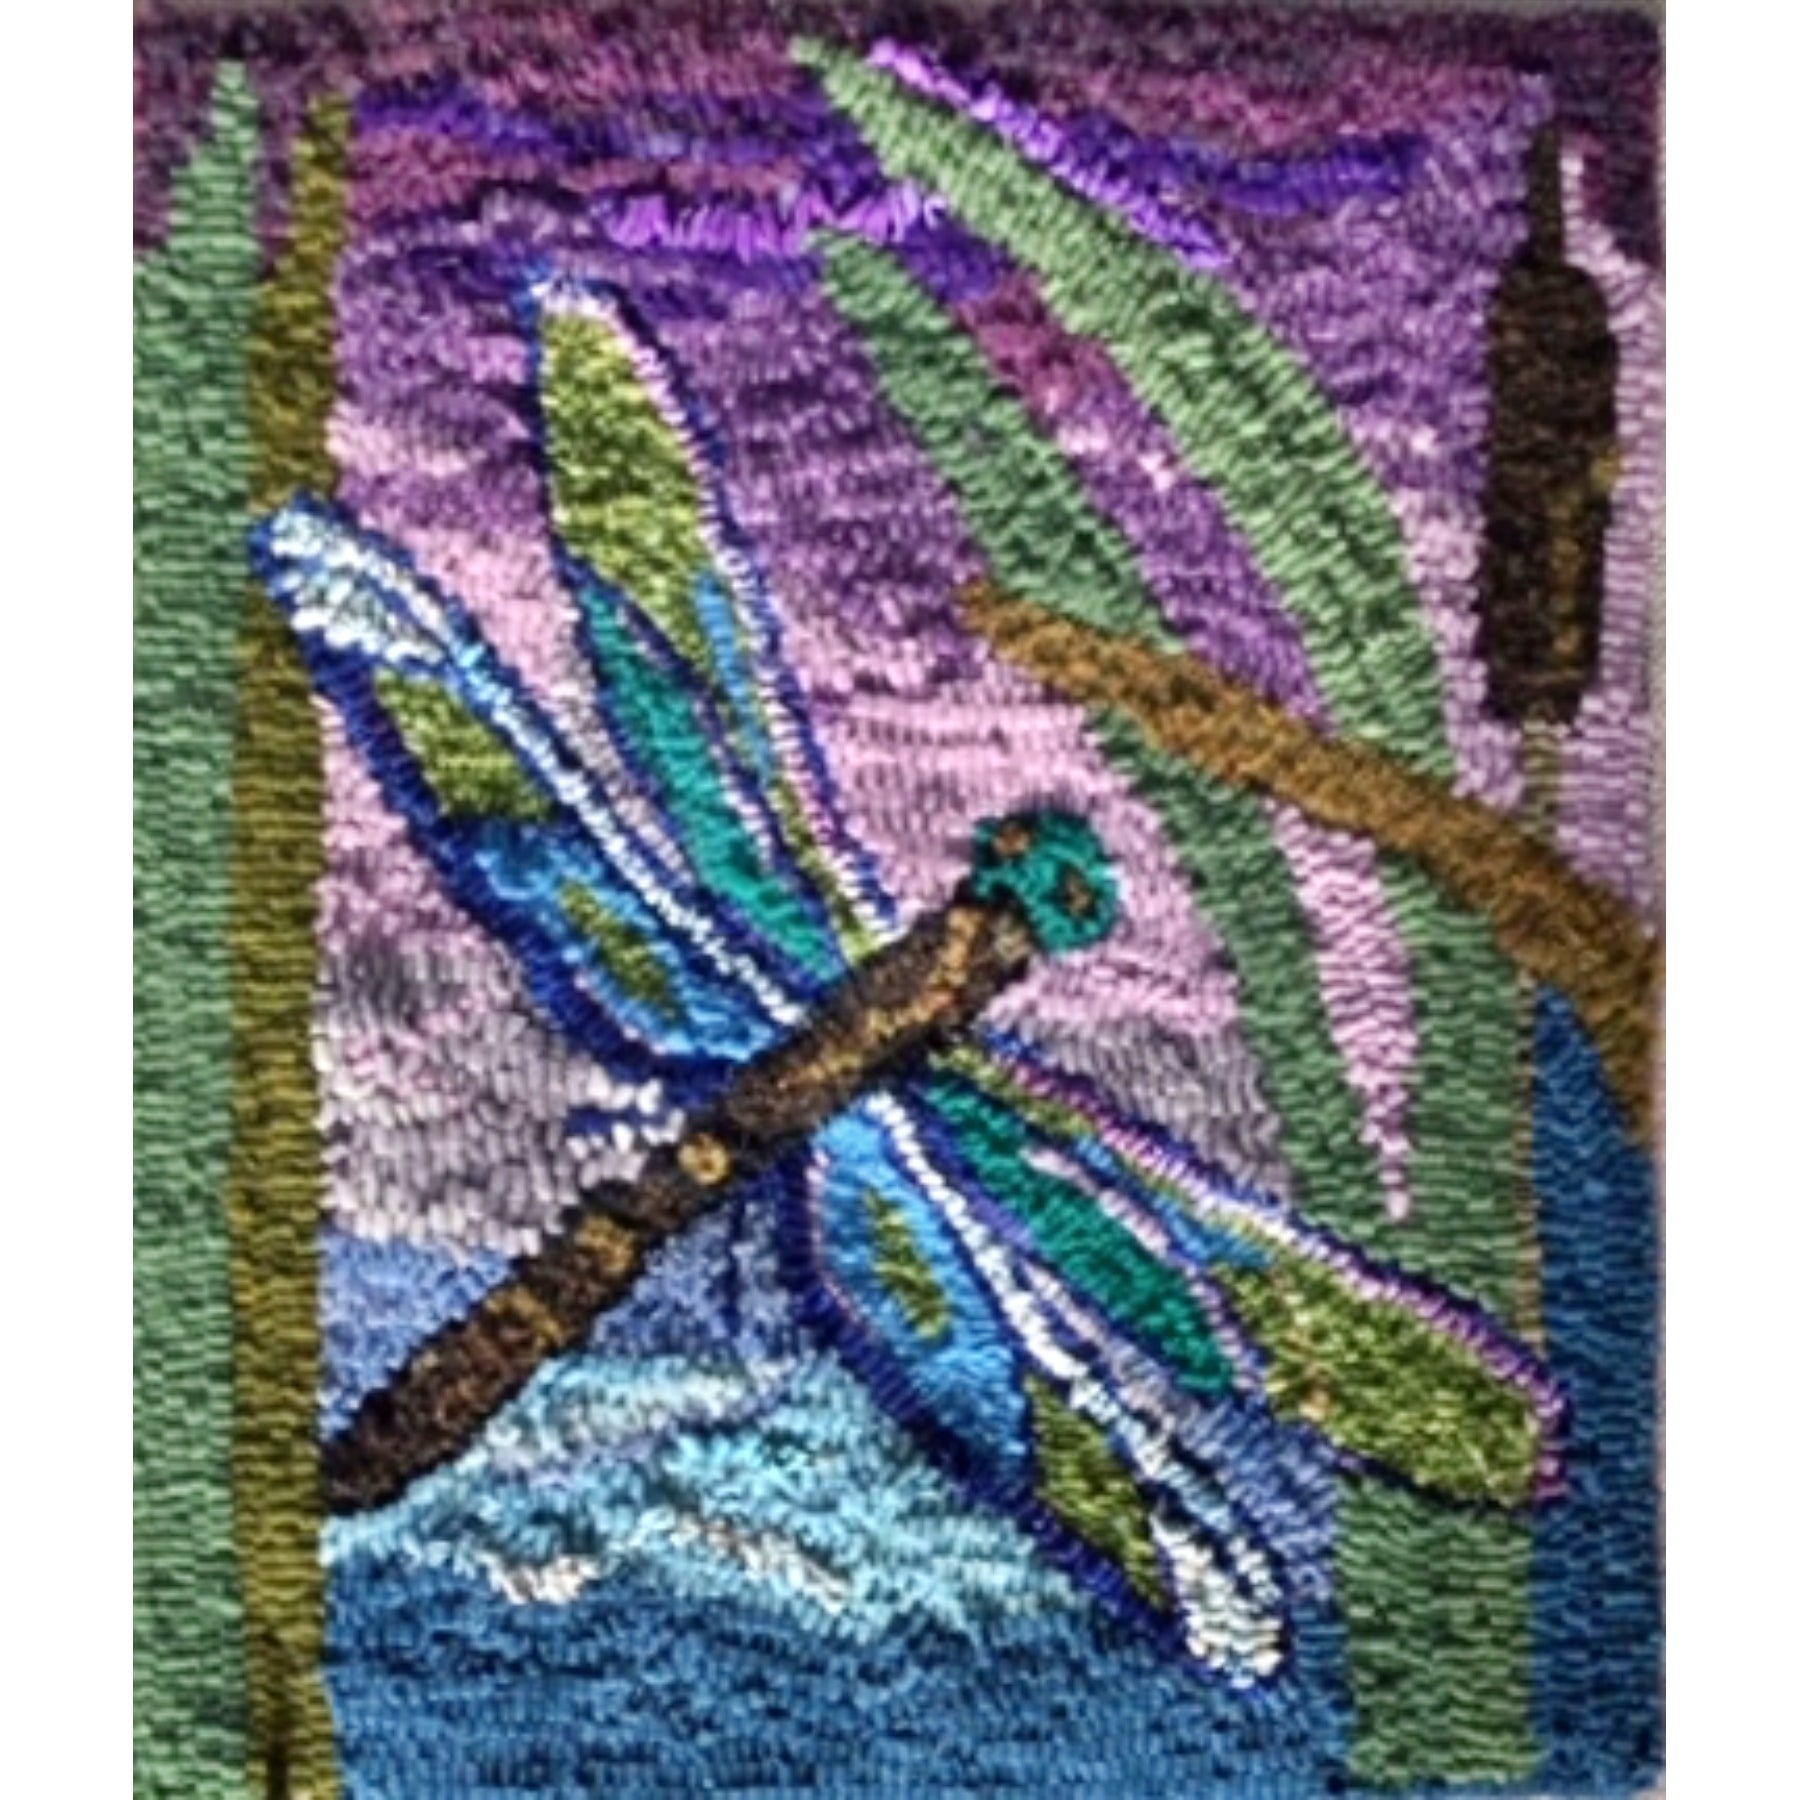 Dragonflies, rug hooked by Annette Felice